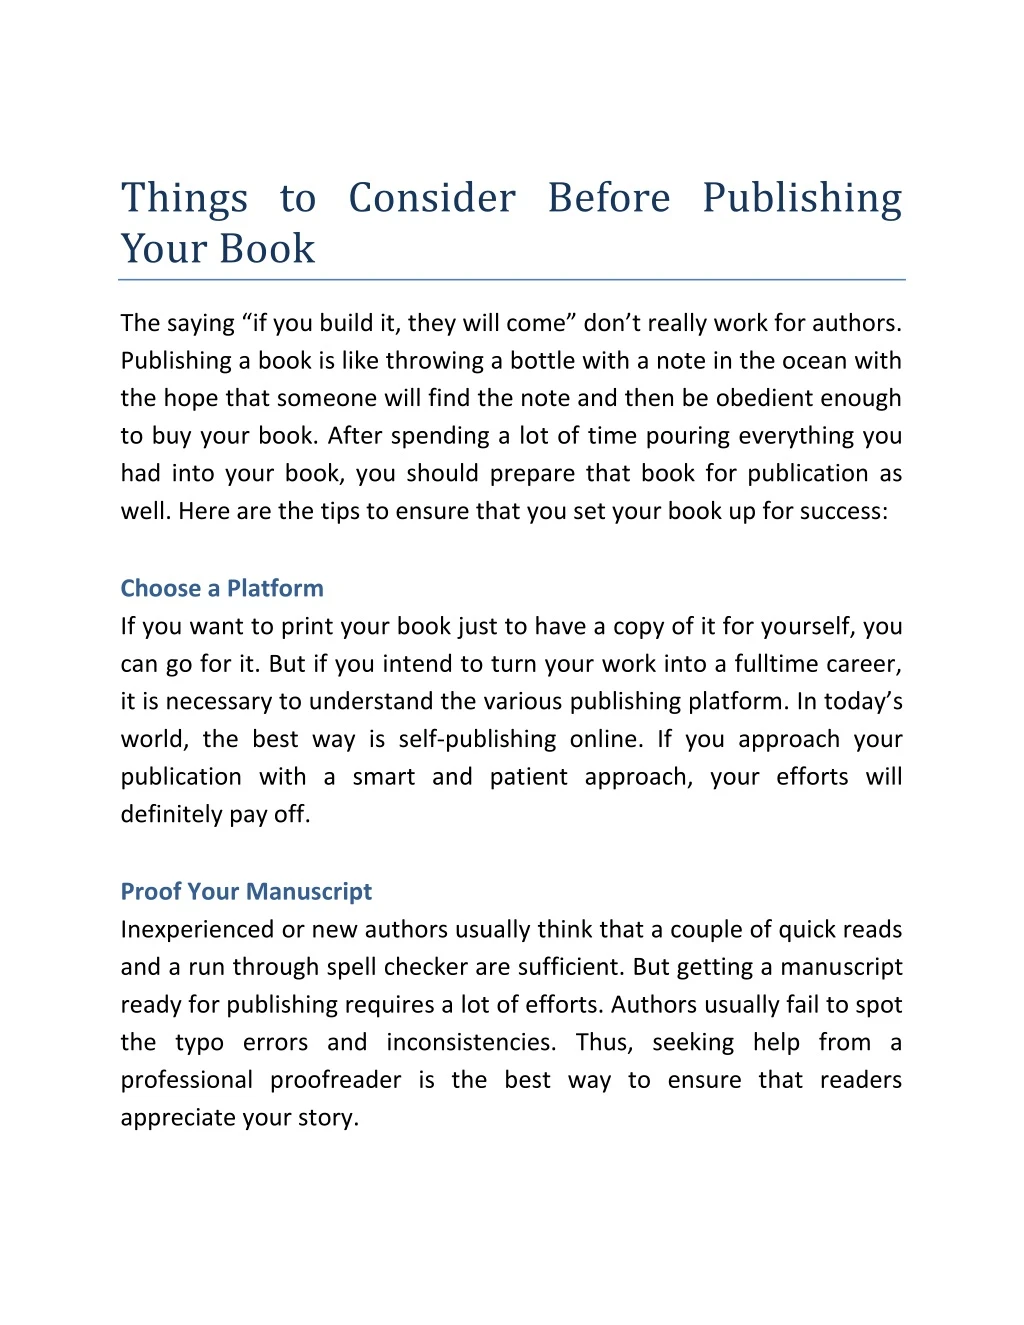 things to consider before publishing your book